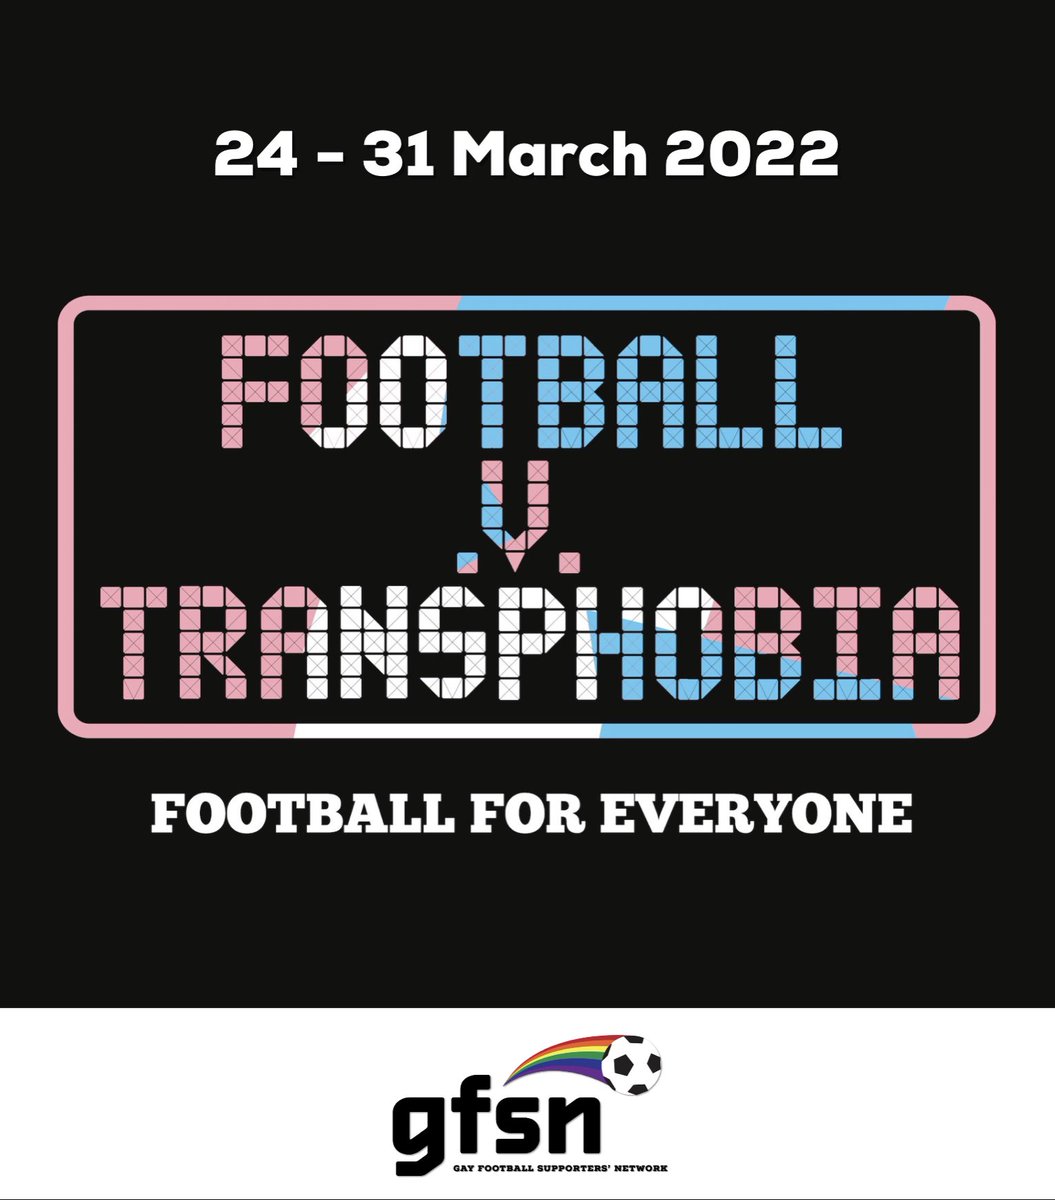 It’s the FootballvTransphobia Week of Action.

As an #LGBTQ+ league and network we are proud to be a safe and welcoming football space for Trans people.

We are proud to be a #TransFootyAlly and we encourage you to show your support this #FvT2022

#gfsn | #footballforall